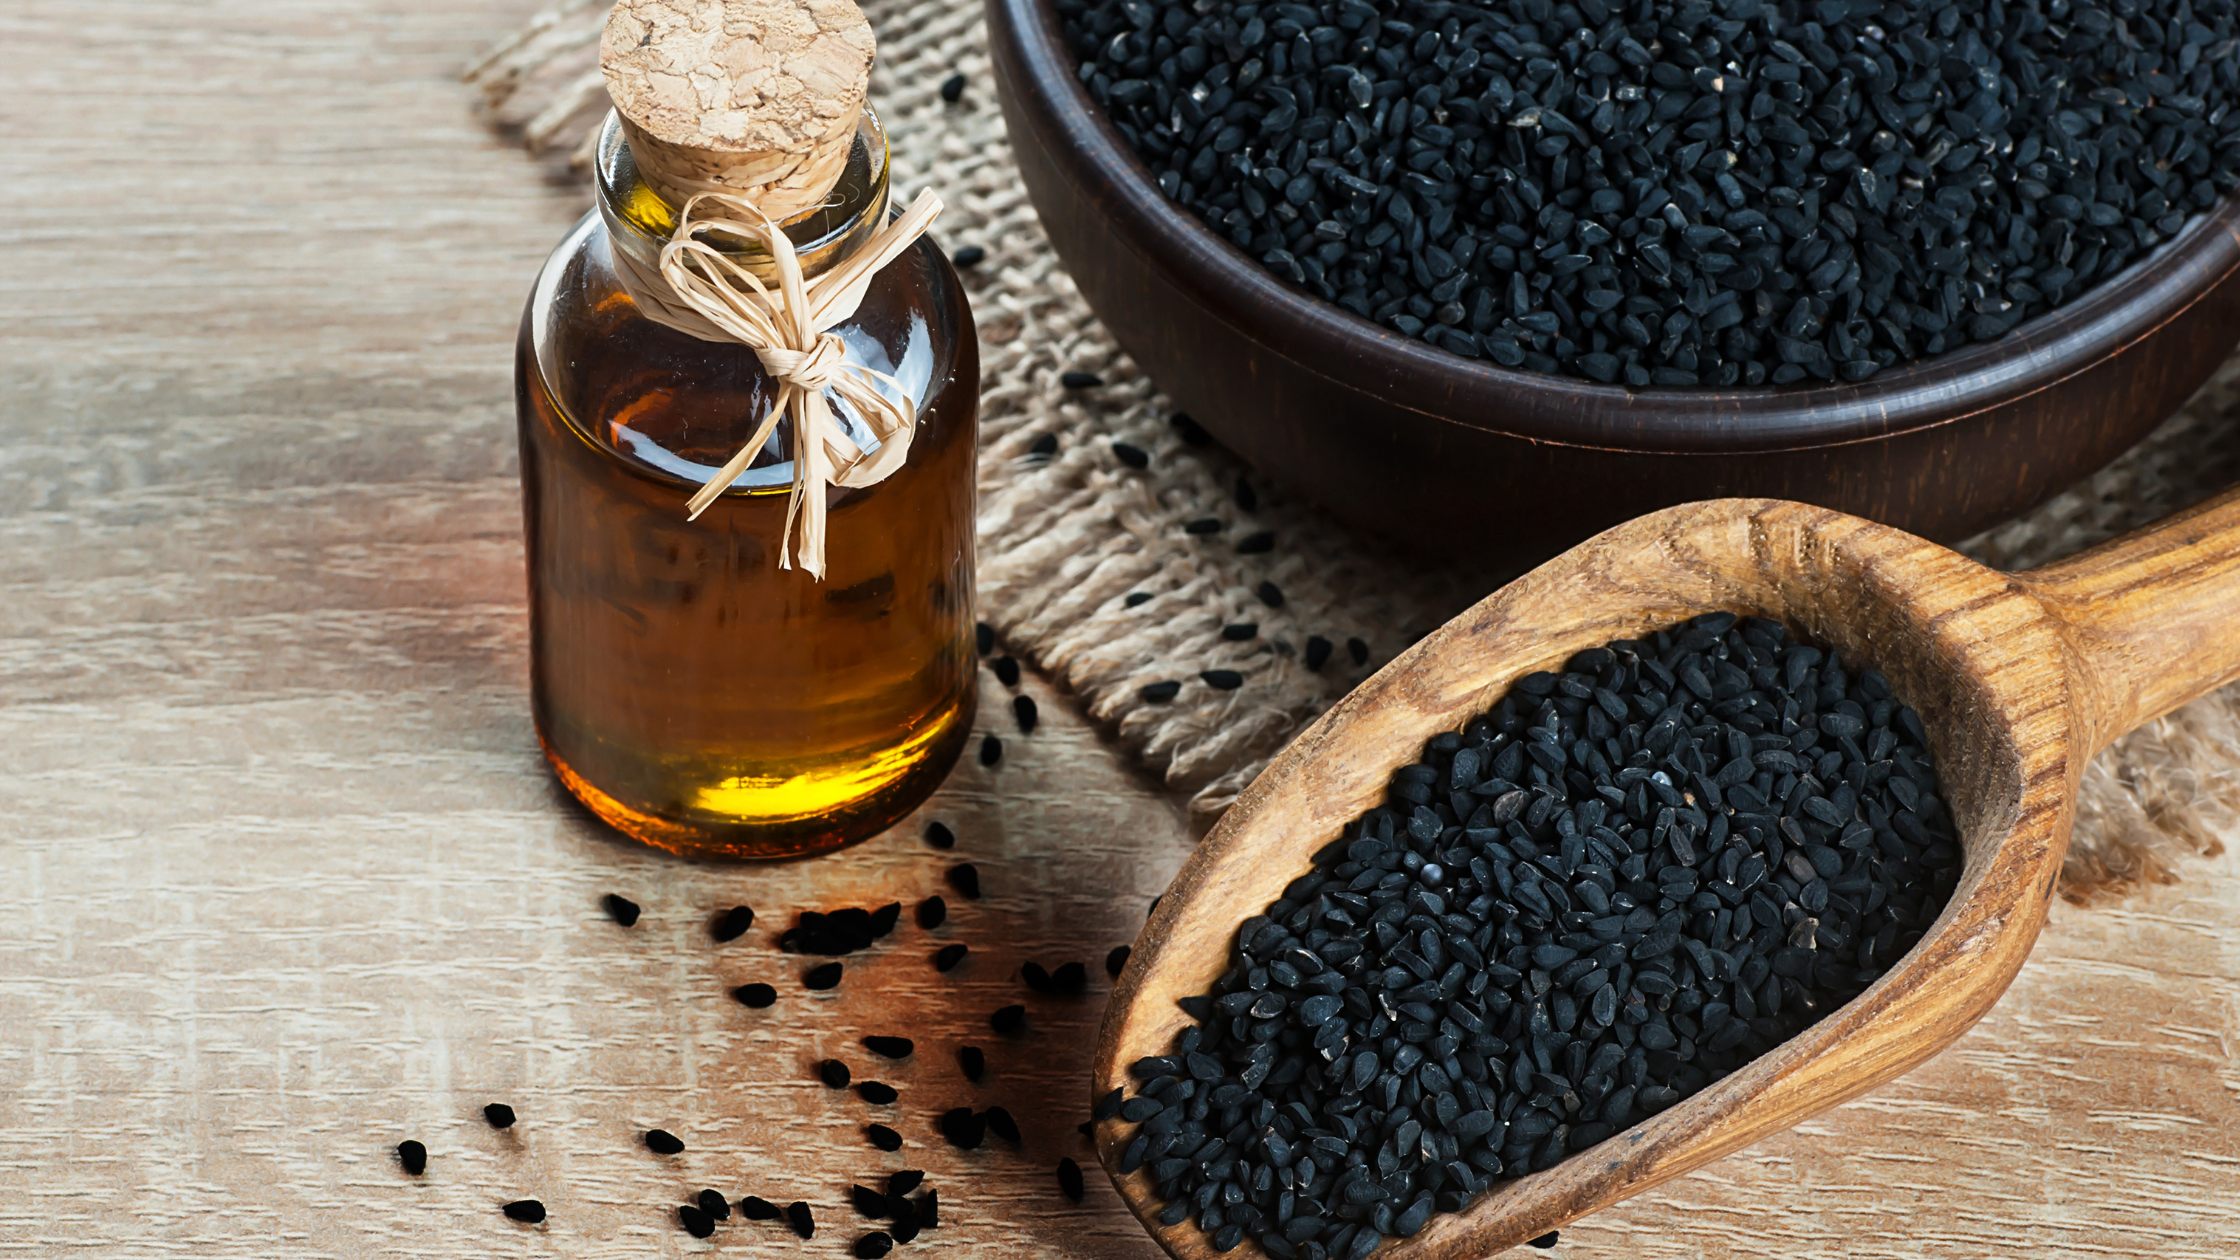 Can Black Seed Oil Aid in Weight Loss? Separating Fact from Fiction